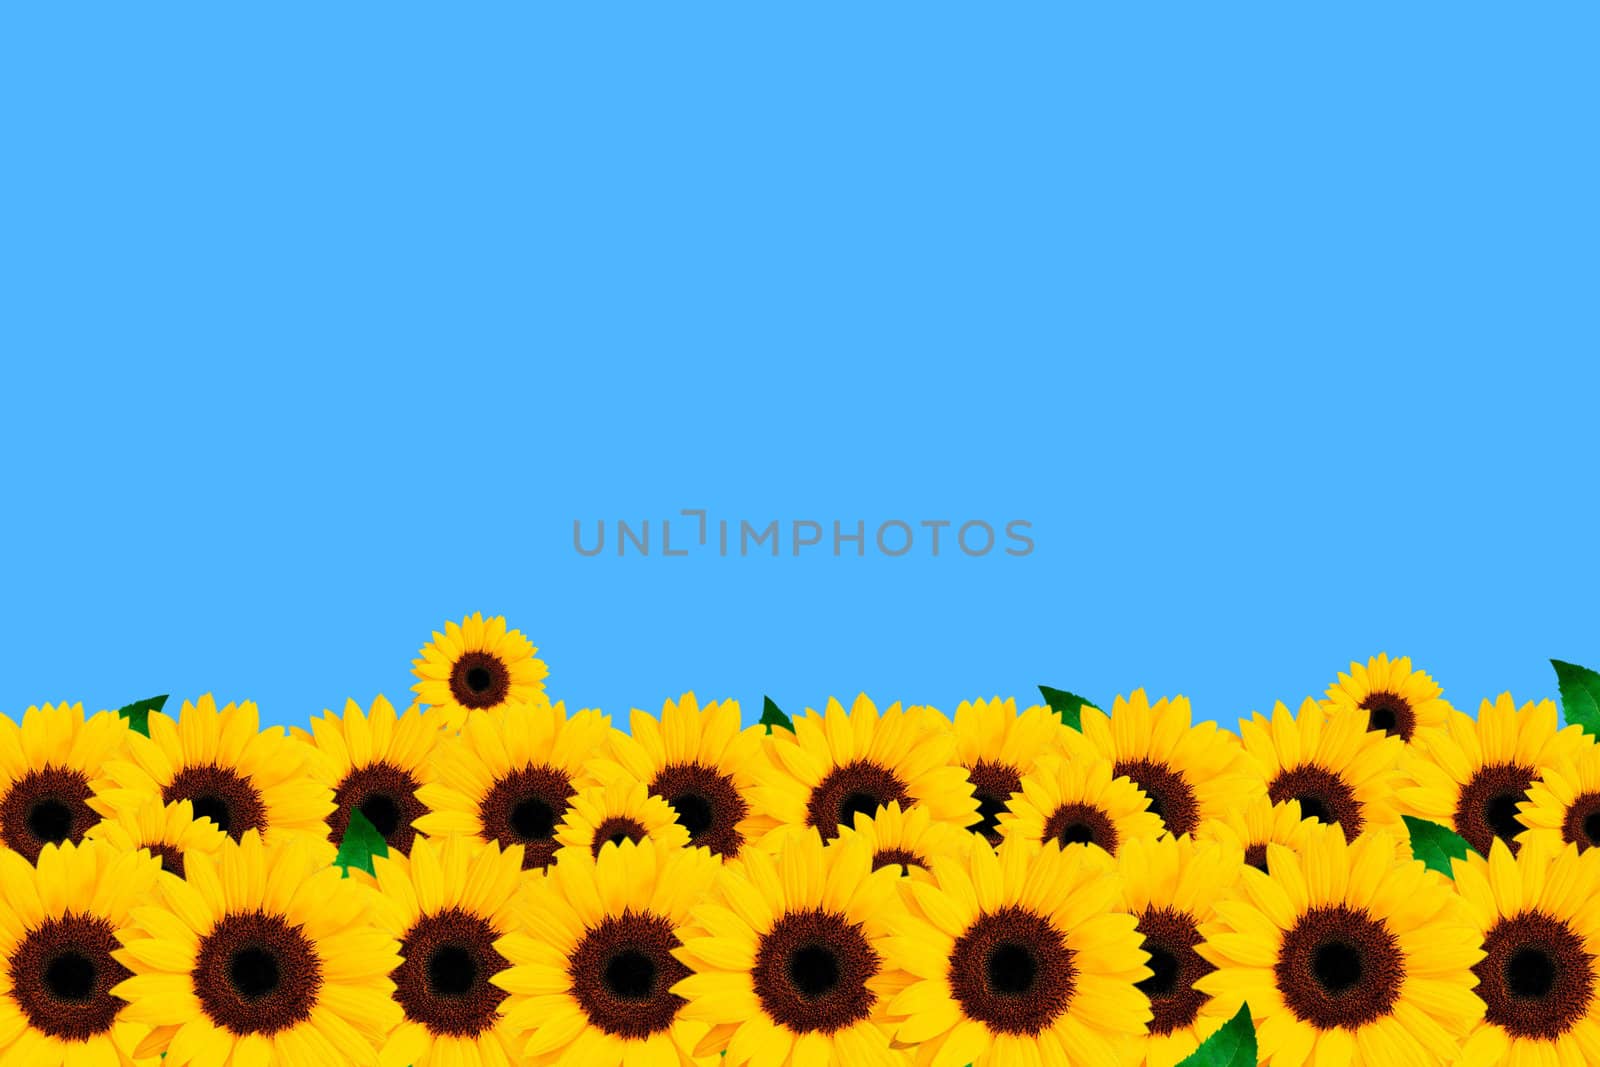 Sunflower on a blue background by petrkurgan